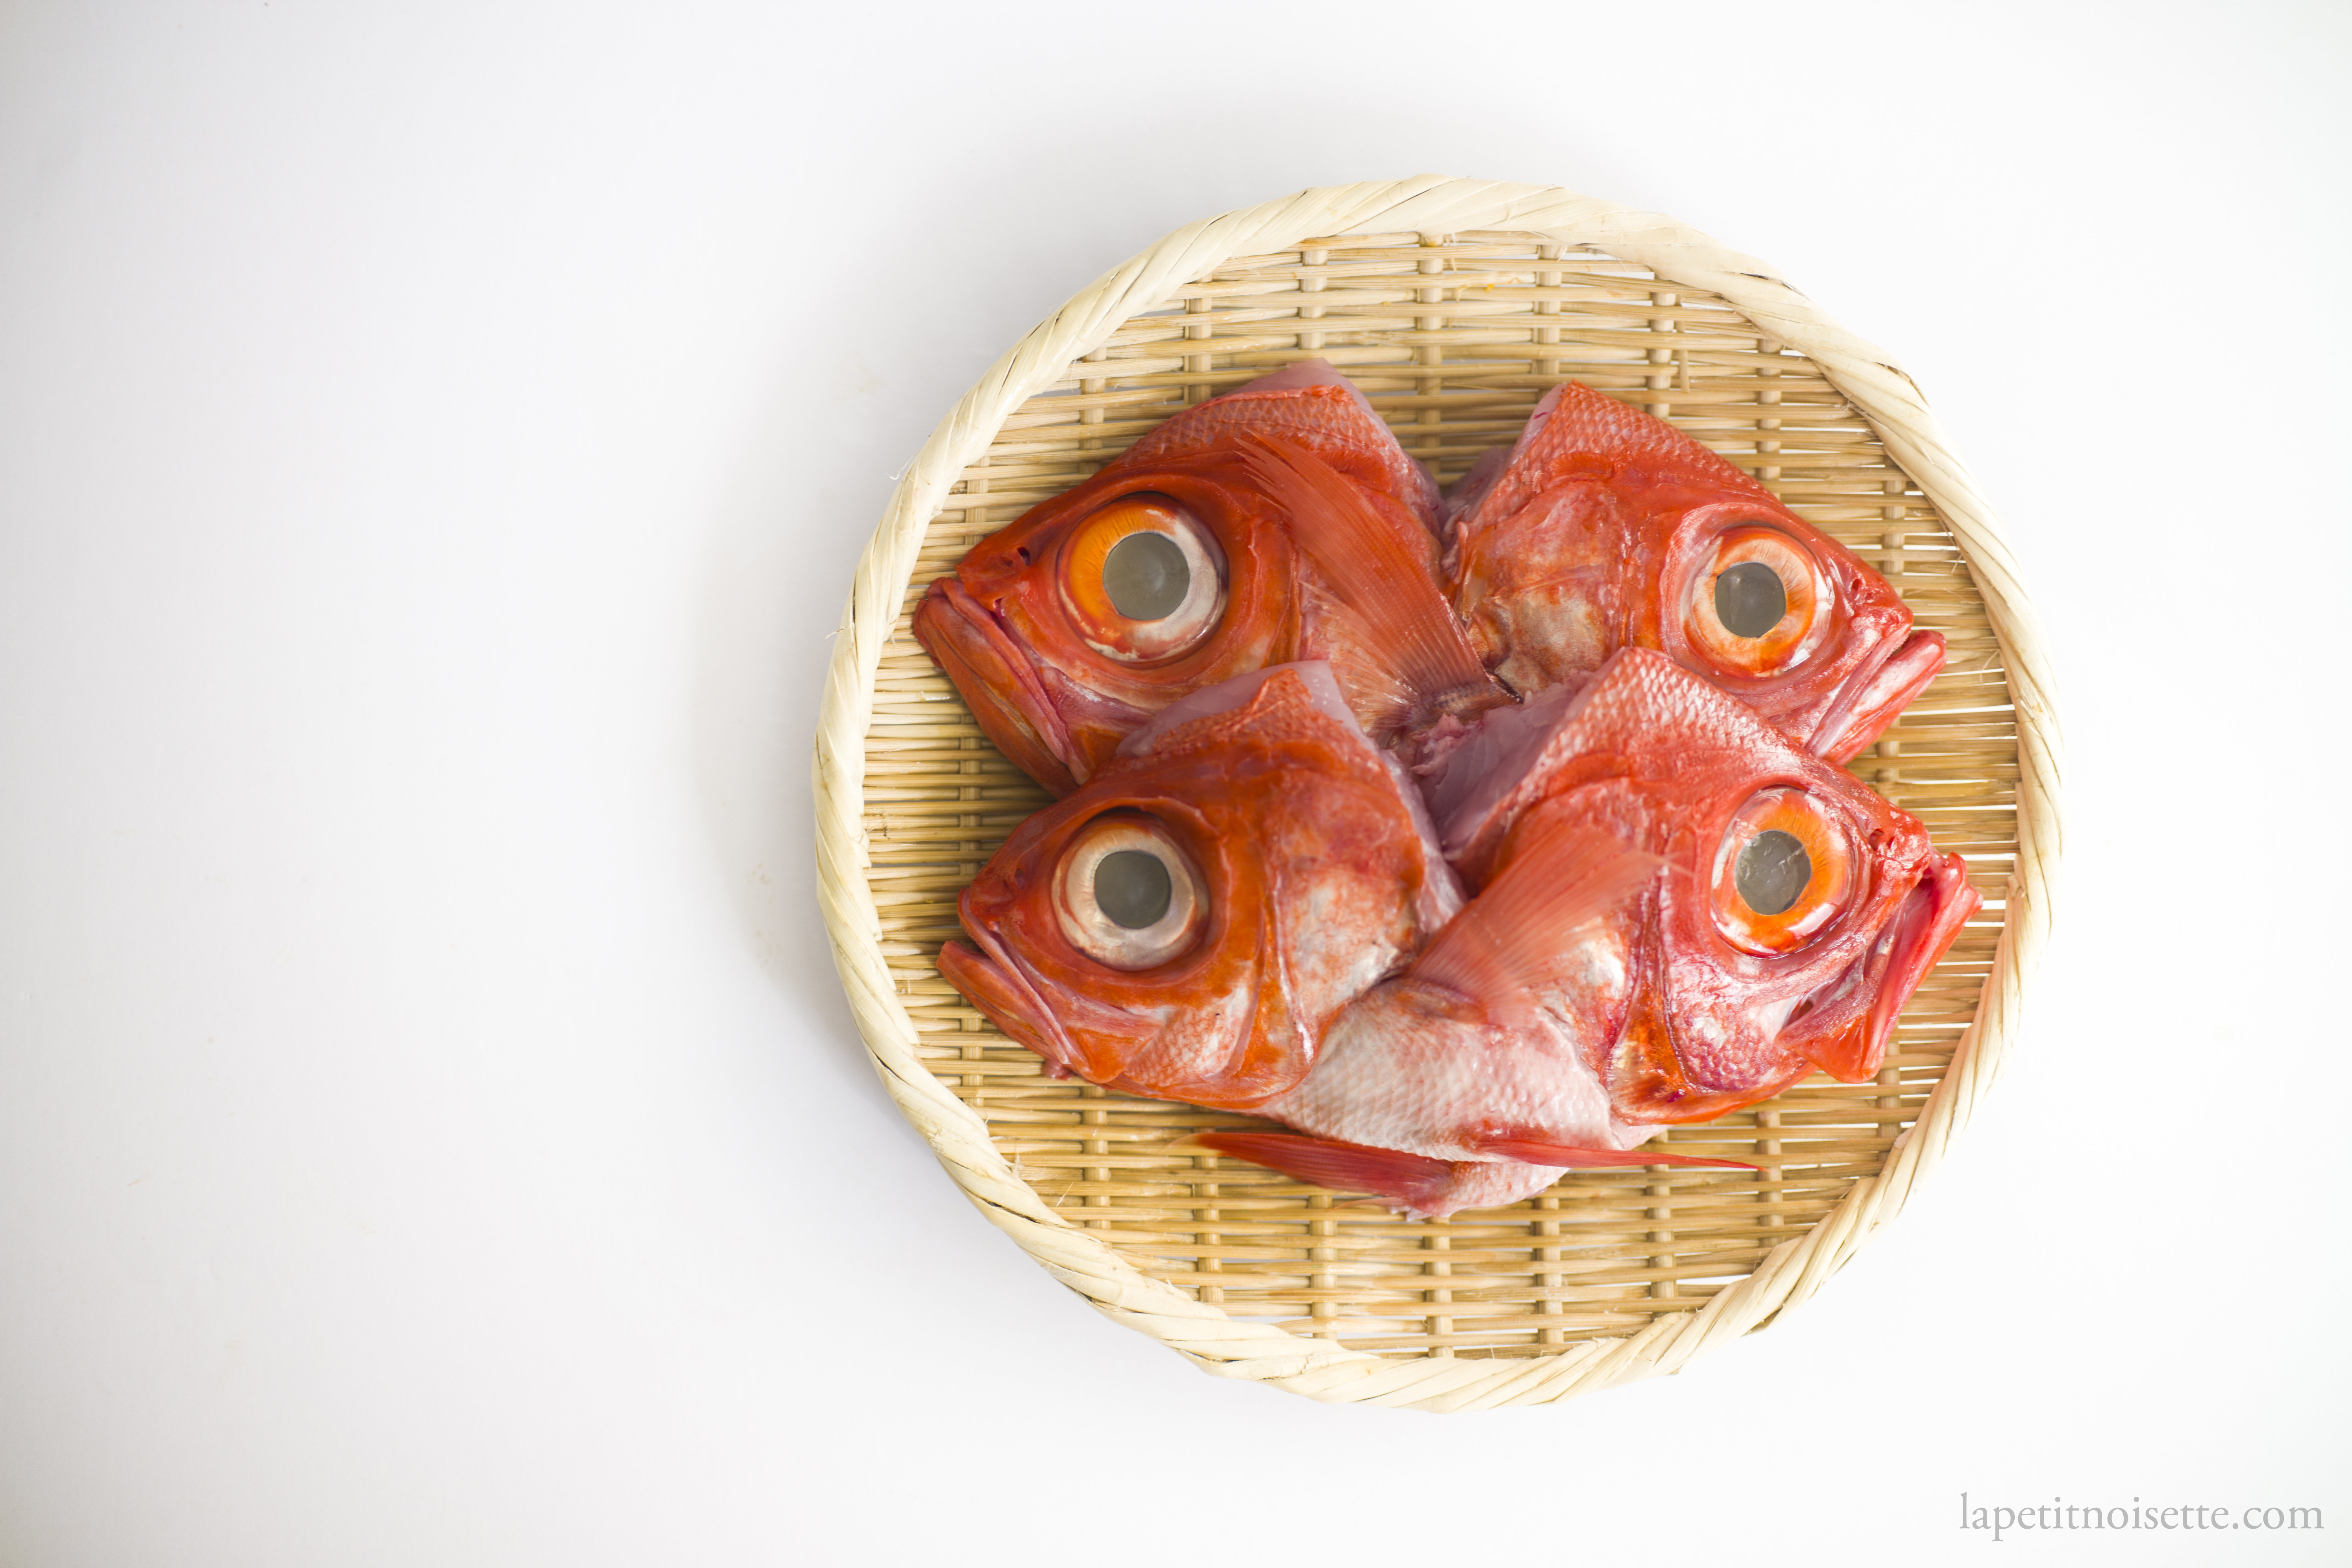 Kinmedai fish heads split in half and draining on a bamboo colander.